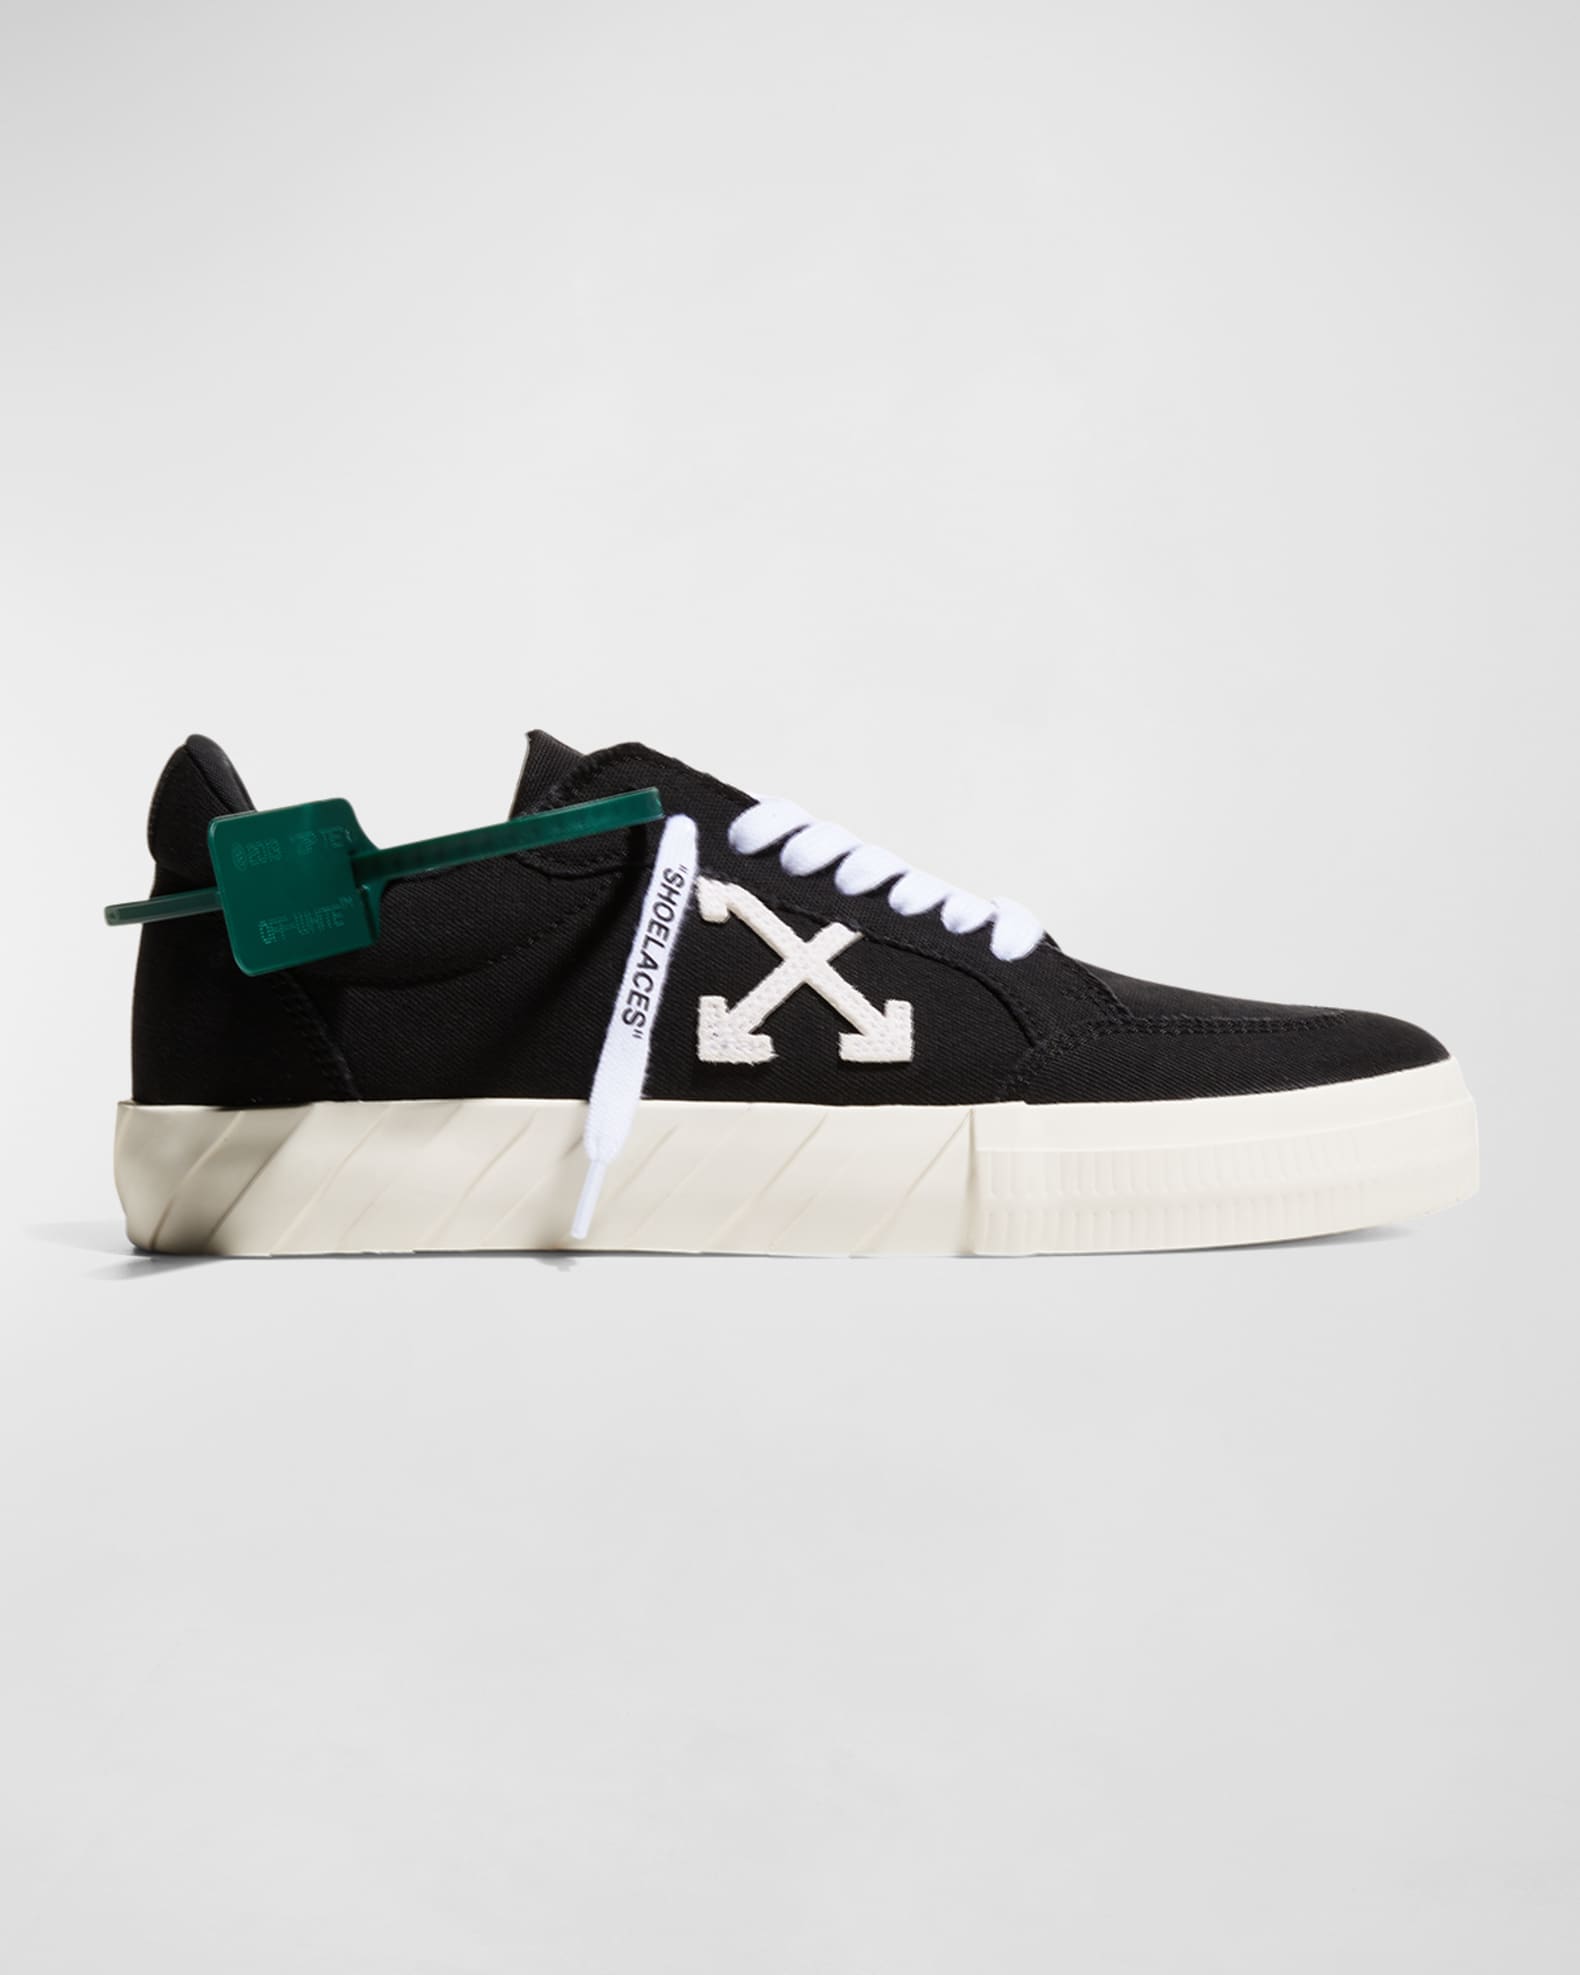 Louis Vuitton Black/Grey Canvas And Suede 'Stardust' Lace Up